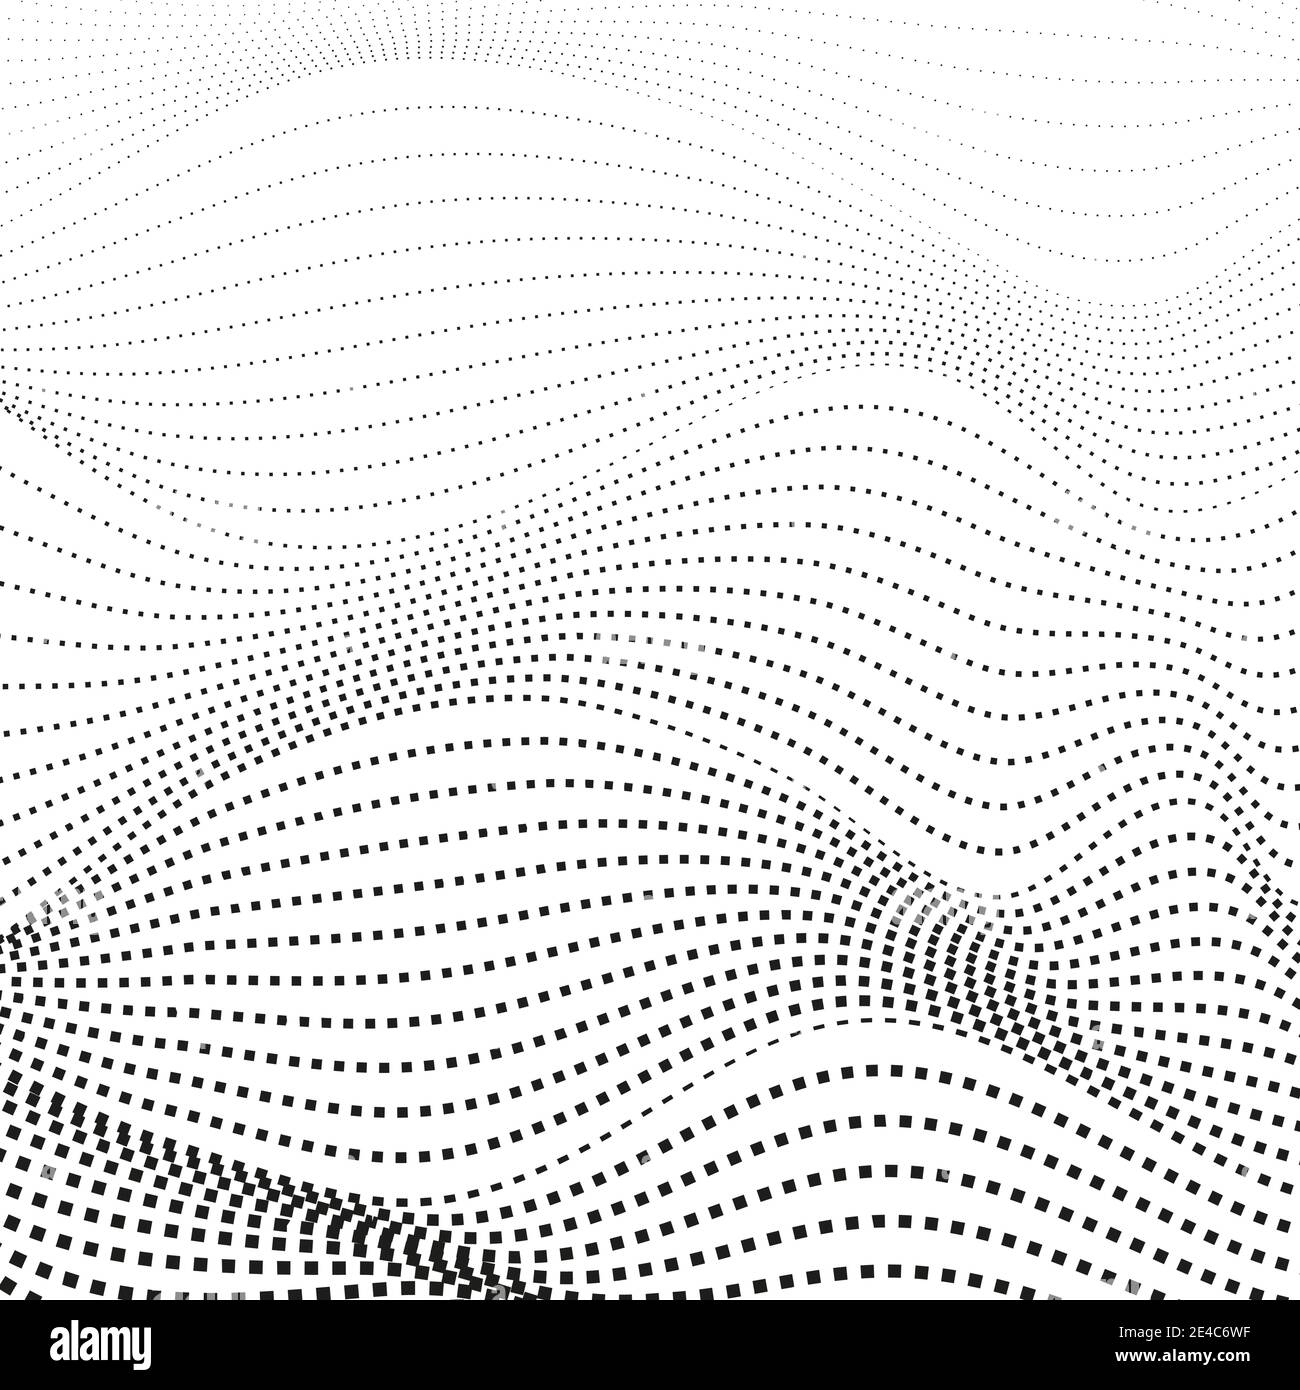 Monochrome op art design. Black dotted squiggle lines. Abstract background, deformed curves. Vector halftone pattern. Industrial style concept. EPS10 Stock Vector